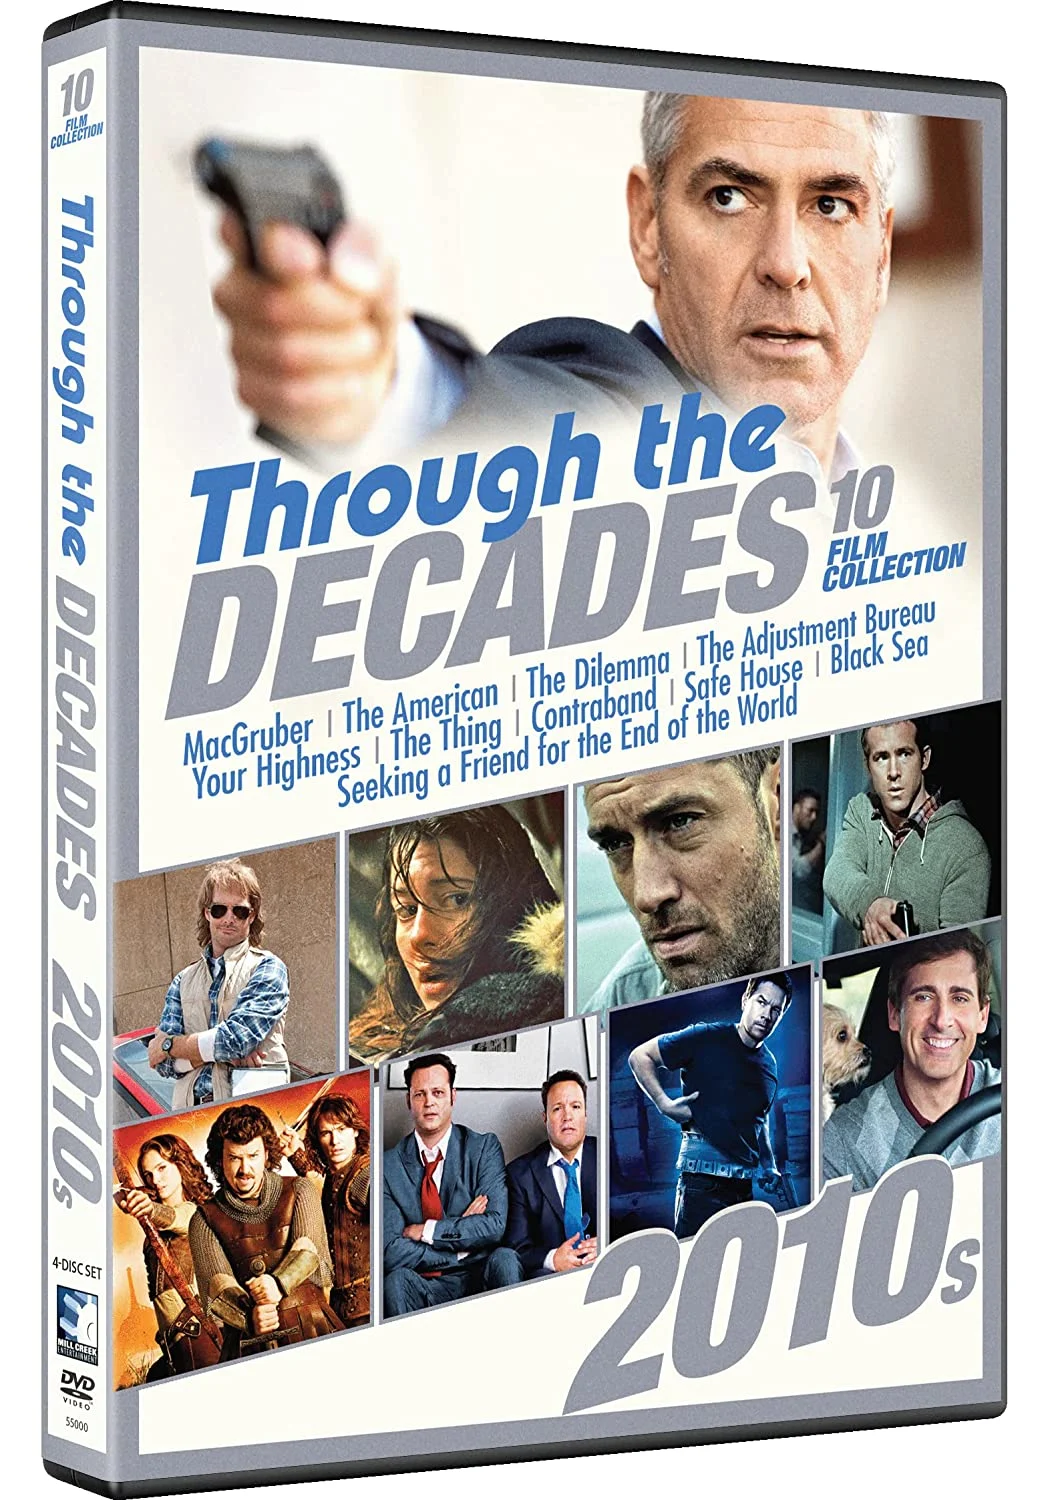 Through the Decades: 2010’s Collection (DVD) on MovieShack